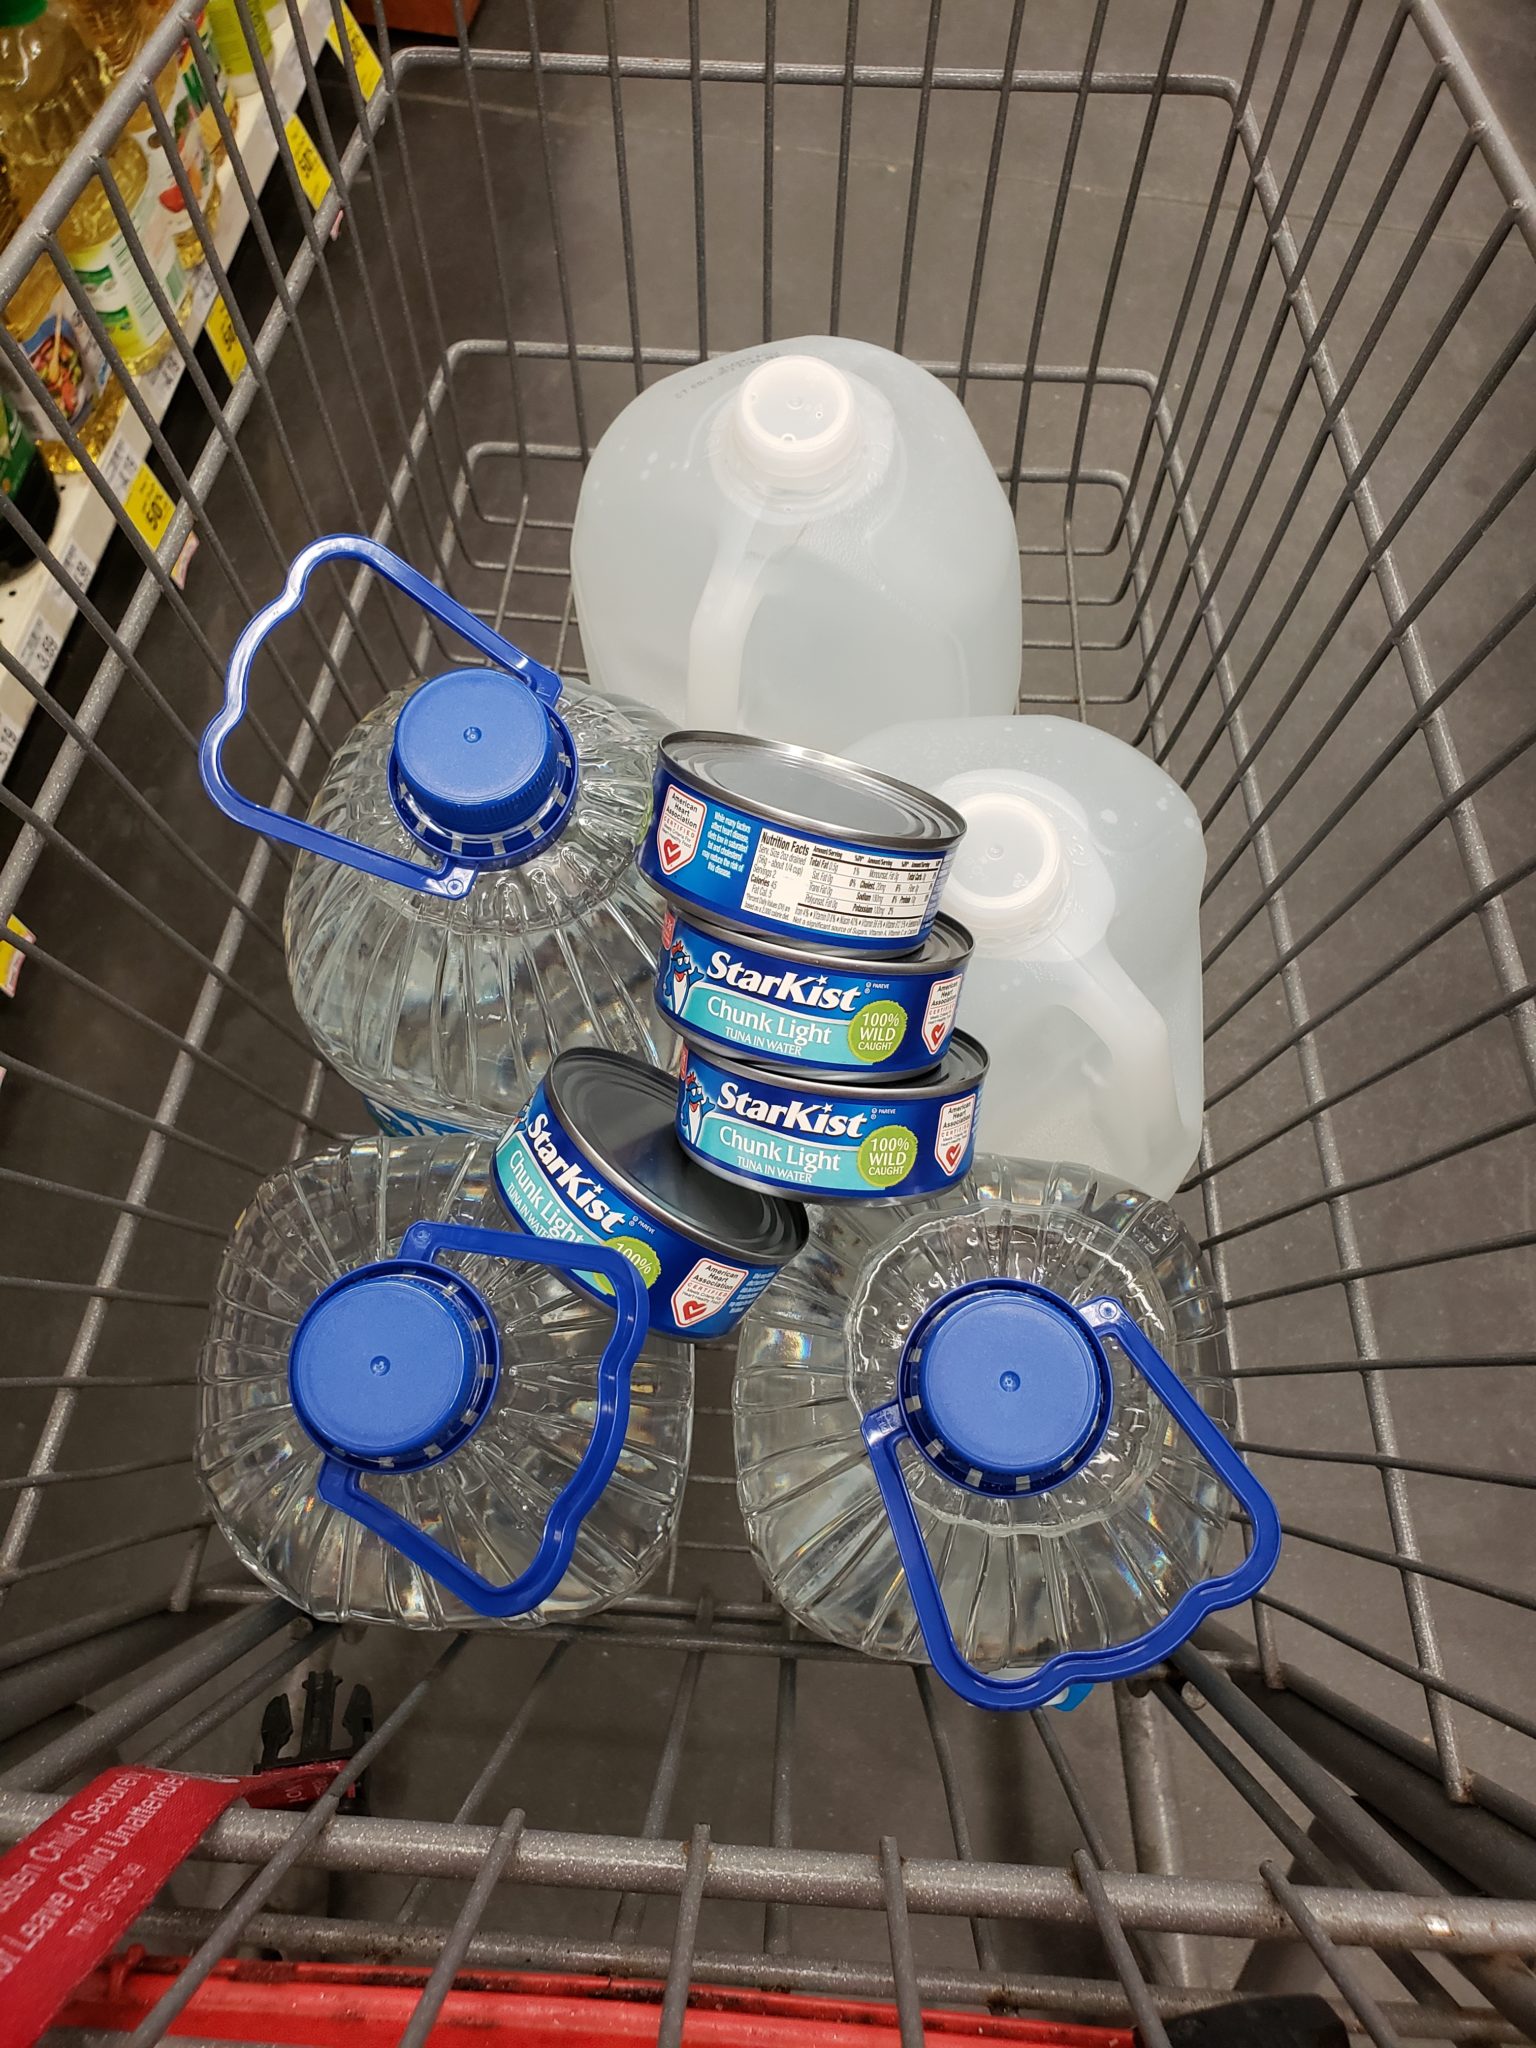 a shopping cart full of water bottles and cans